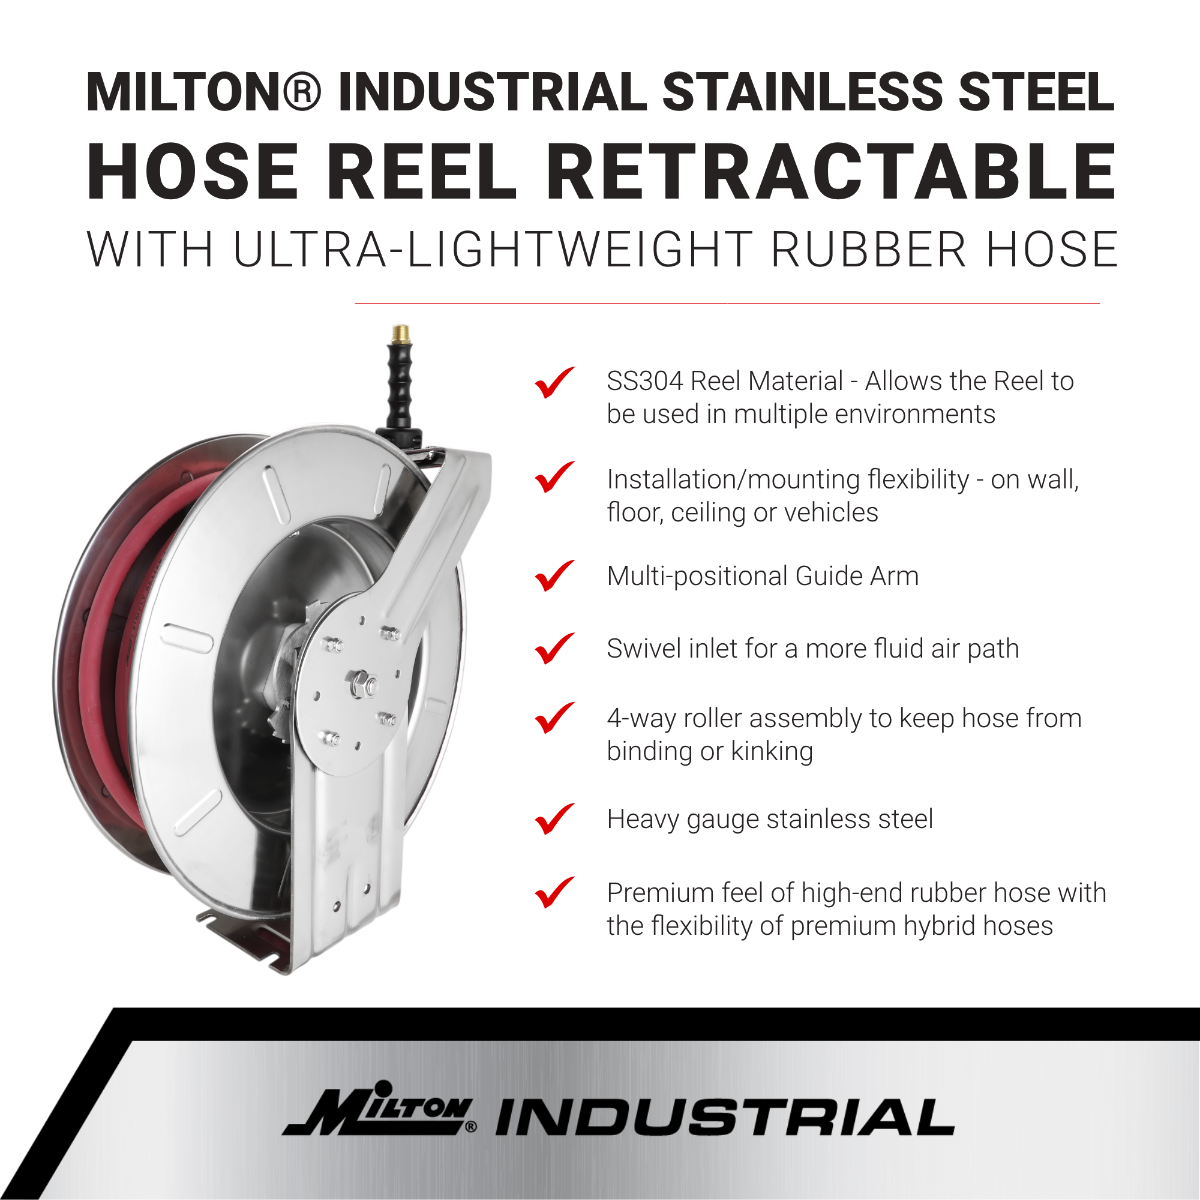 Milton Stainless Steel Hose Reel Retractable, 1/2 ID x 25' Ultra